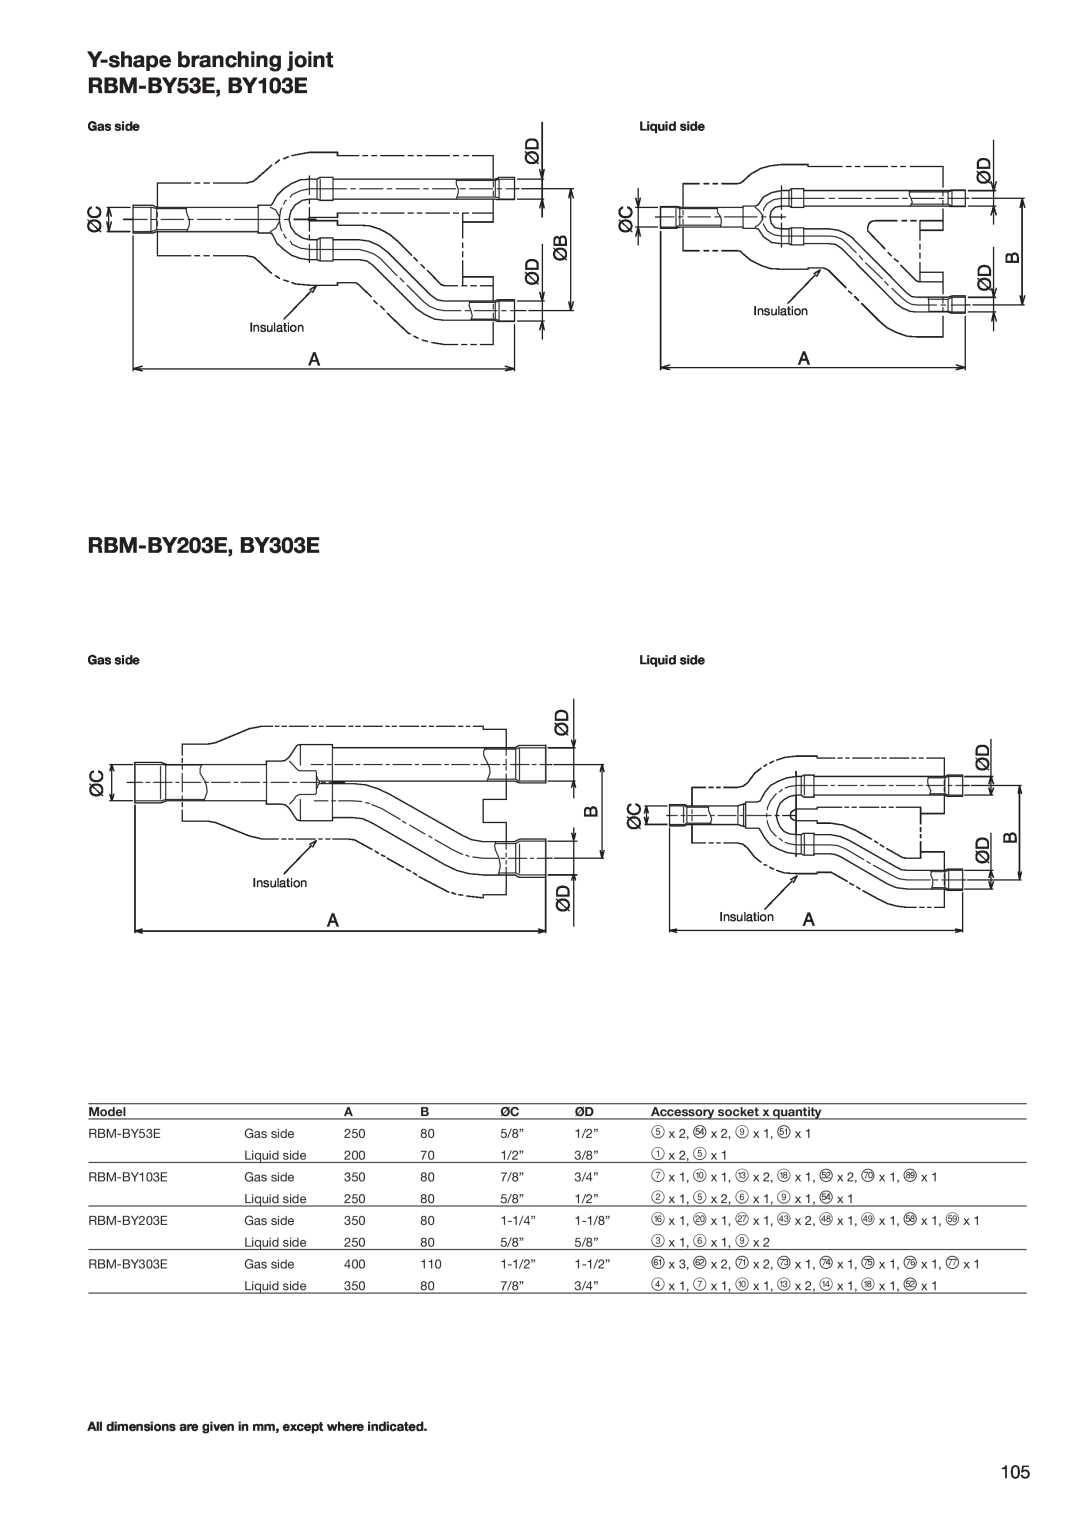 Toshiba HFC R-410A manual Y-shapebranching joint RBM-BY53E,BY103E, RBM-BY203E,BY303E 